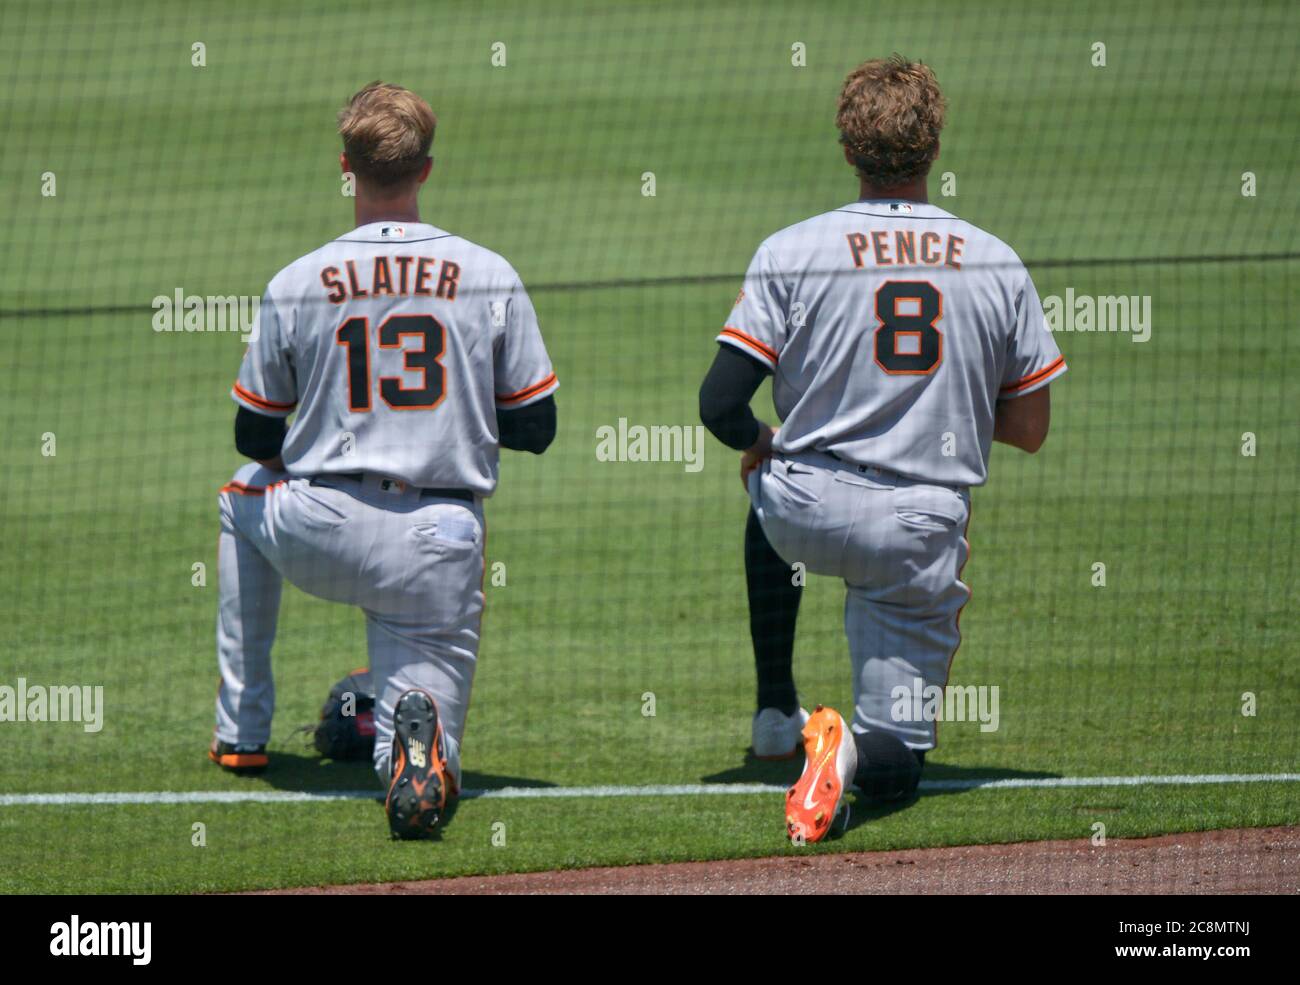 Los Angeles, United States. 26th July, 2020. San Francisco Giants' Austin Slater (13) and Hunter Pence (8) kneel during the National Anthem at Dodger Stadium in Los Angeles on Saturday, July 25, 2020. The Giants defeated the Dodgers 5-4. Photo by Jim Ruymen/UPI Credit: UPI/Alamy Live News Stock Photo